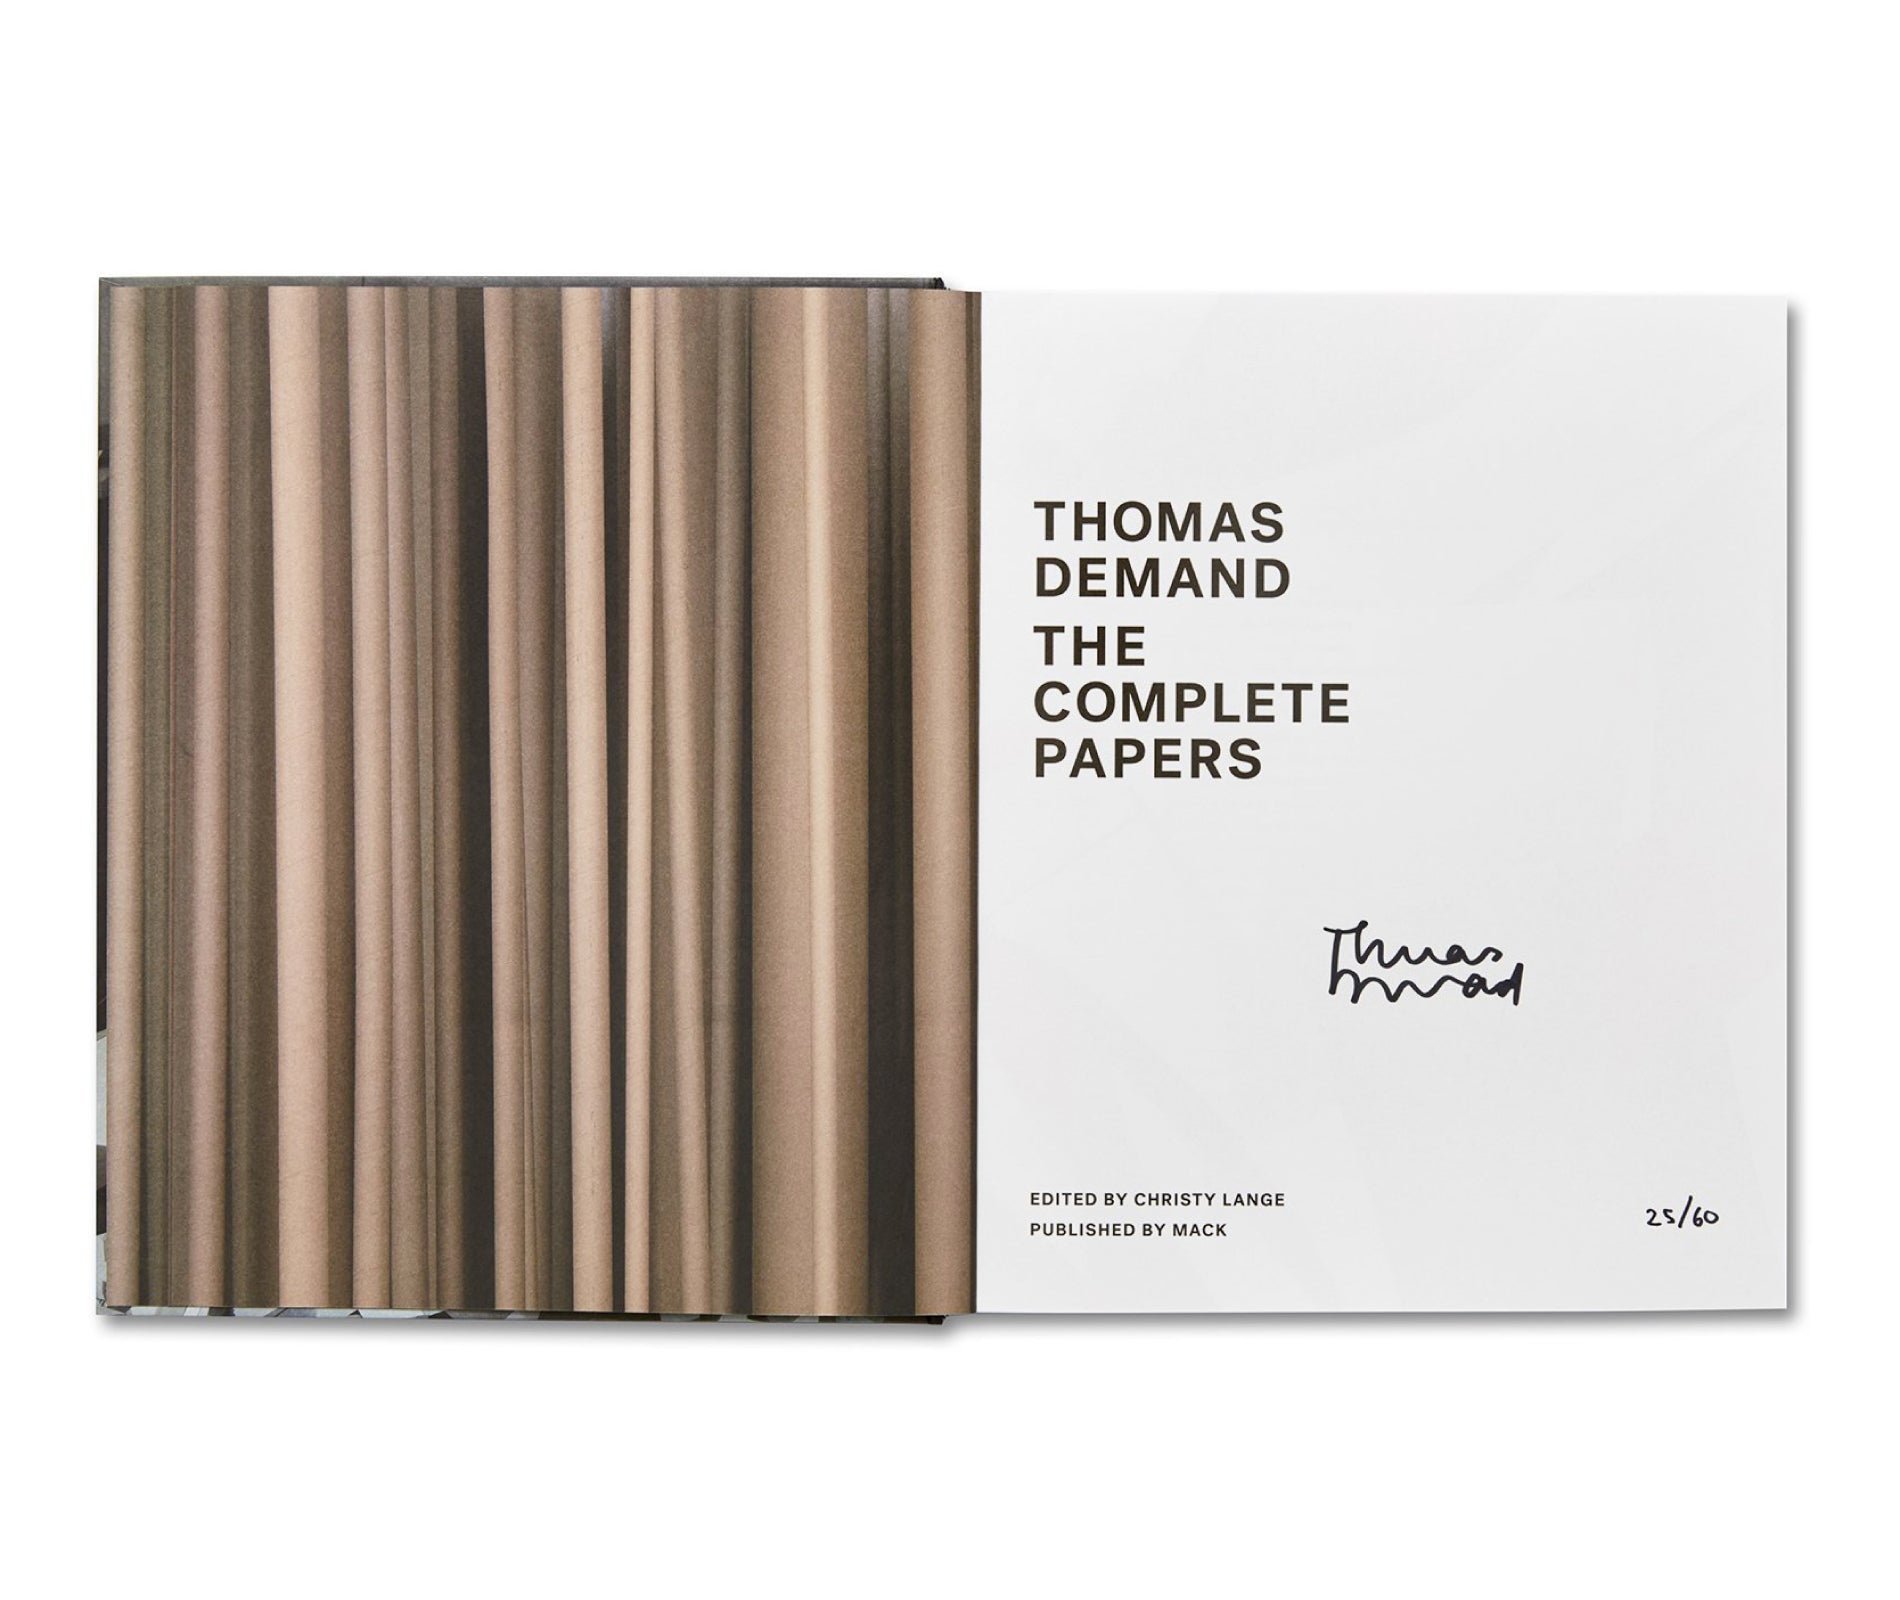 THE COMPLETE PAPERS by Thomas Demand [SPECIAL EDITION]